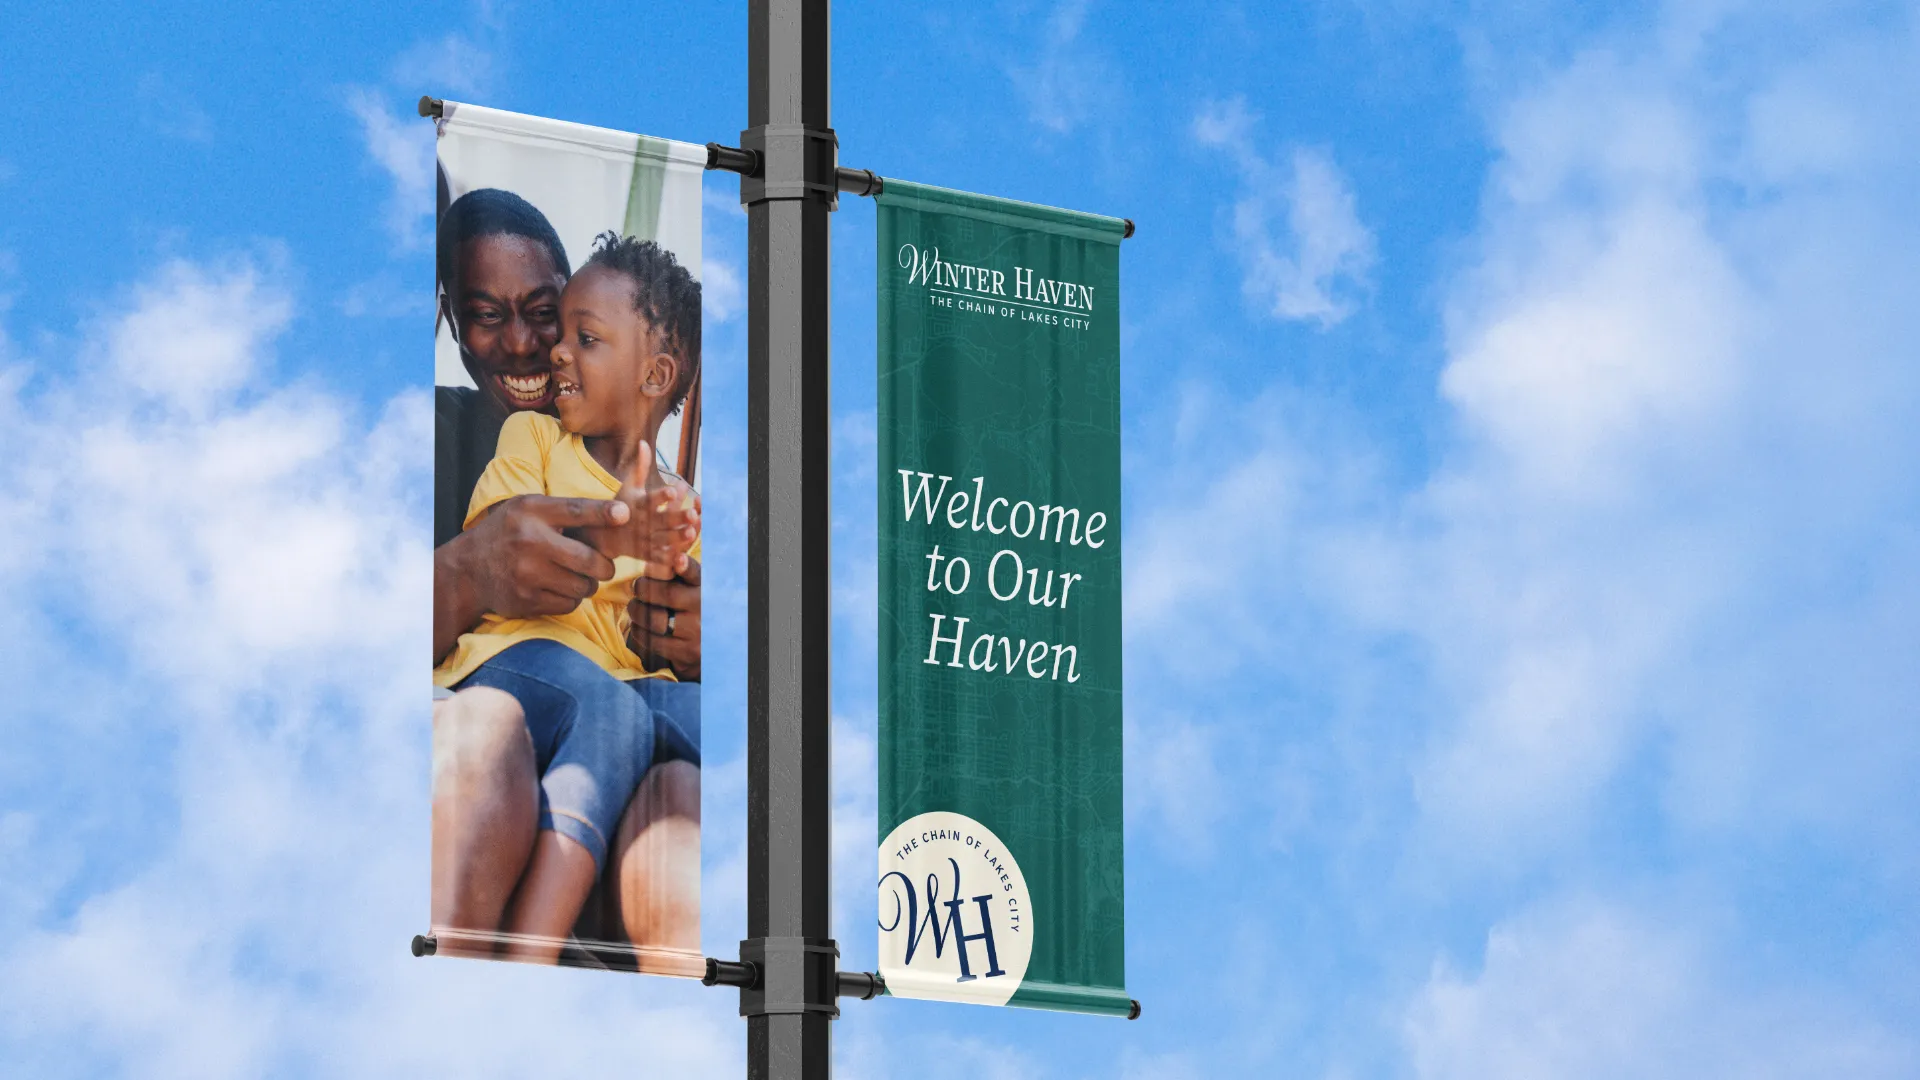 City of winter haven welcome board